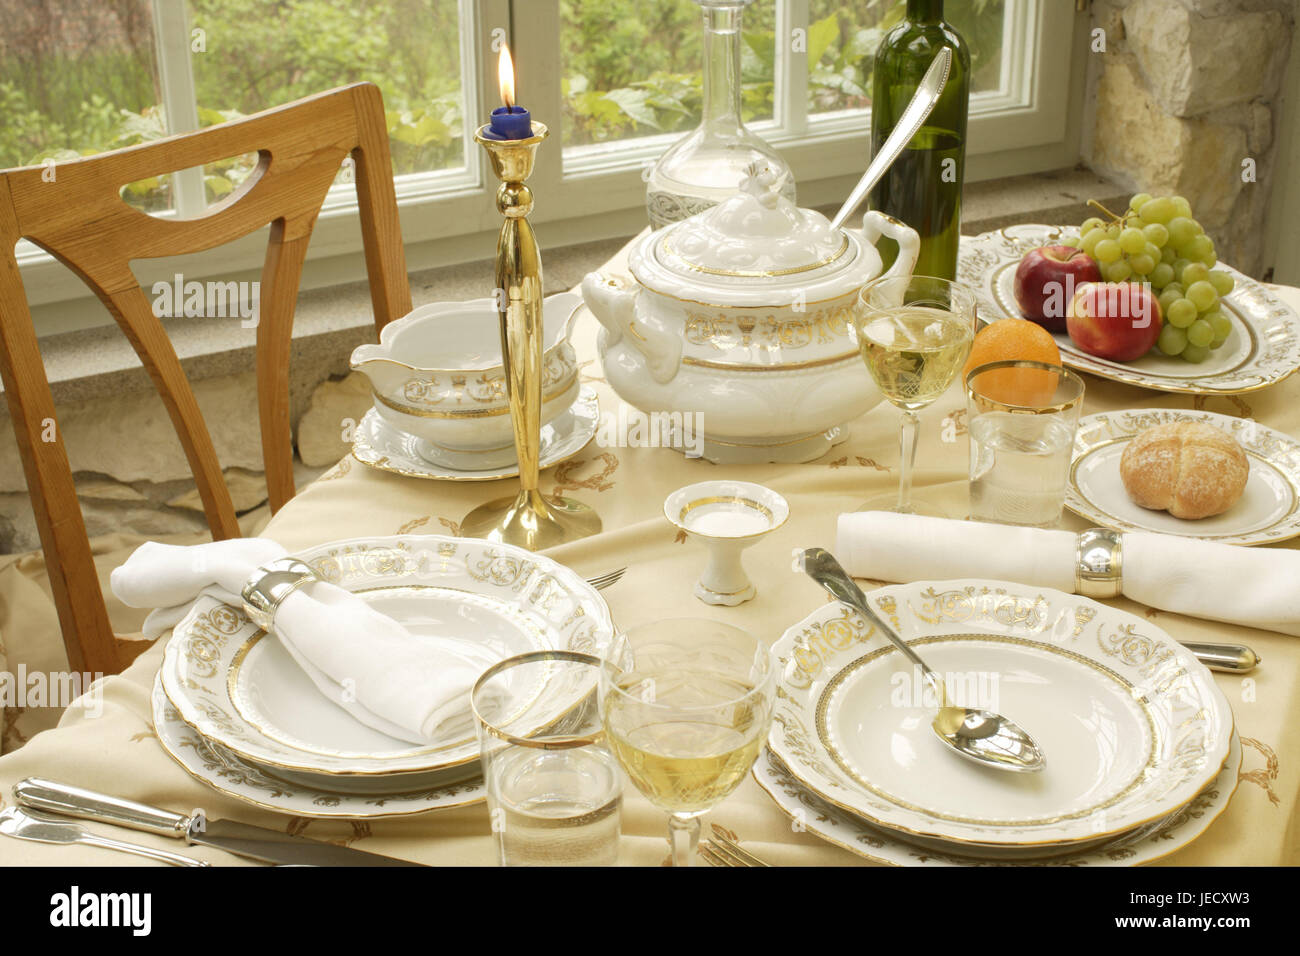 Table, covered, porcelain, elegantly, dishes, china, covers, plates, sauceboat, soup tureen, tureen, wine, wine flask, wineglasses, glasses, decanter, water, fruit plate, fruit, grapes, apples, orange, brass candlestick, skyer, candle-light, substance napkins, napkin rings, festively, flatware, chair, window, nobody, Stock Photo